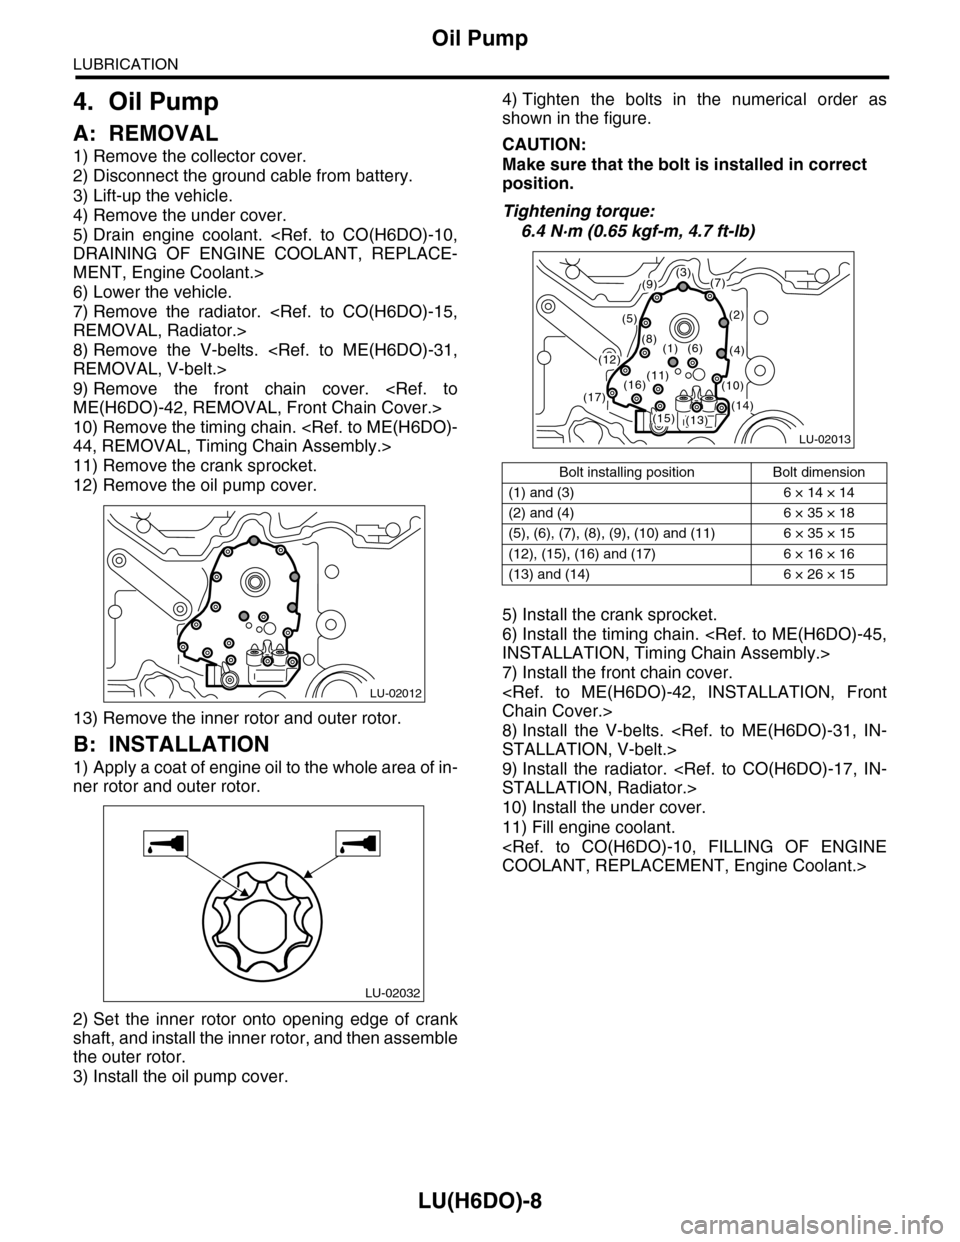 SUBARU TRIBECA 2009 1.G Service Workshop Manual LU(H6DO)-8
Oil Pump
LUBRICATION
4. Oil Pump
A: REMOVAL
1) Remove the collector cover.
2) Disconnect the ground cable from battery.
3) Lift-up the vehicle.
4) Remove the under cover.
5) Drain  engine  